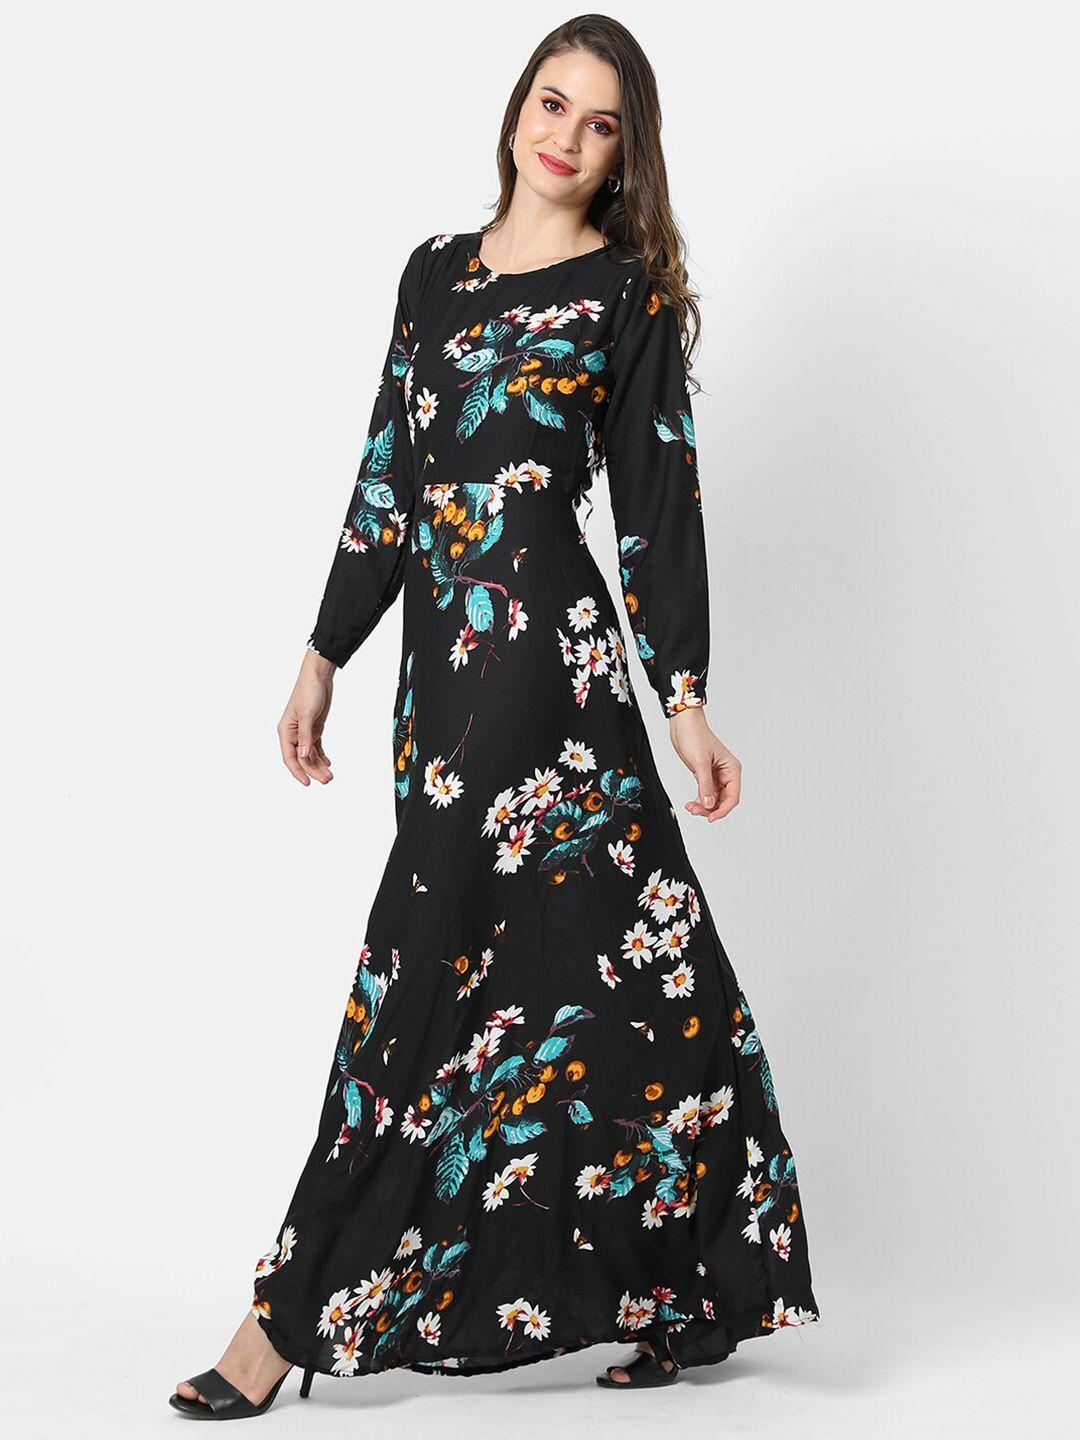 campus sutra black & white floral printed maxi dress